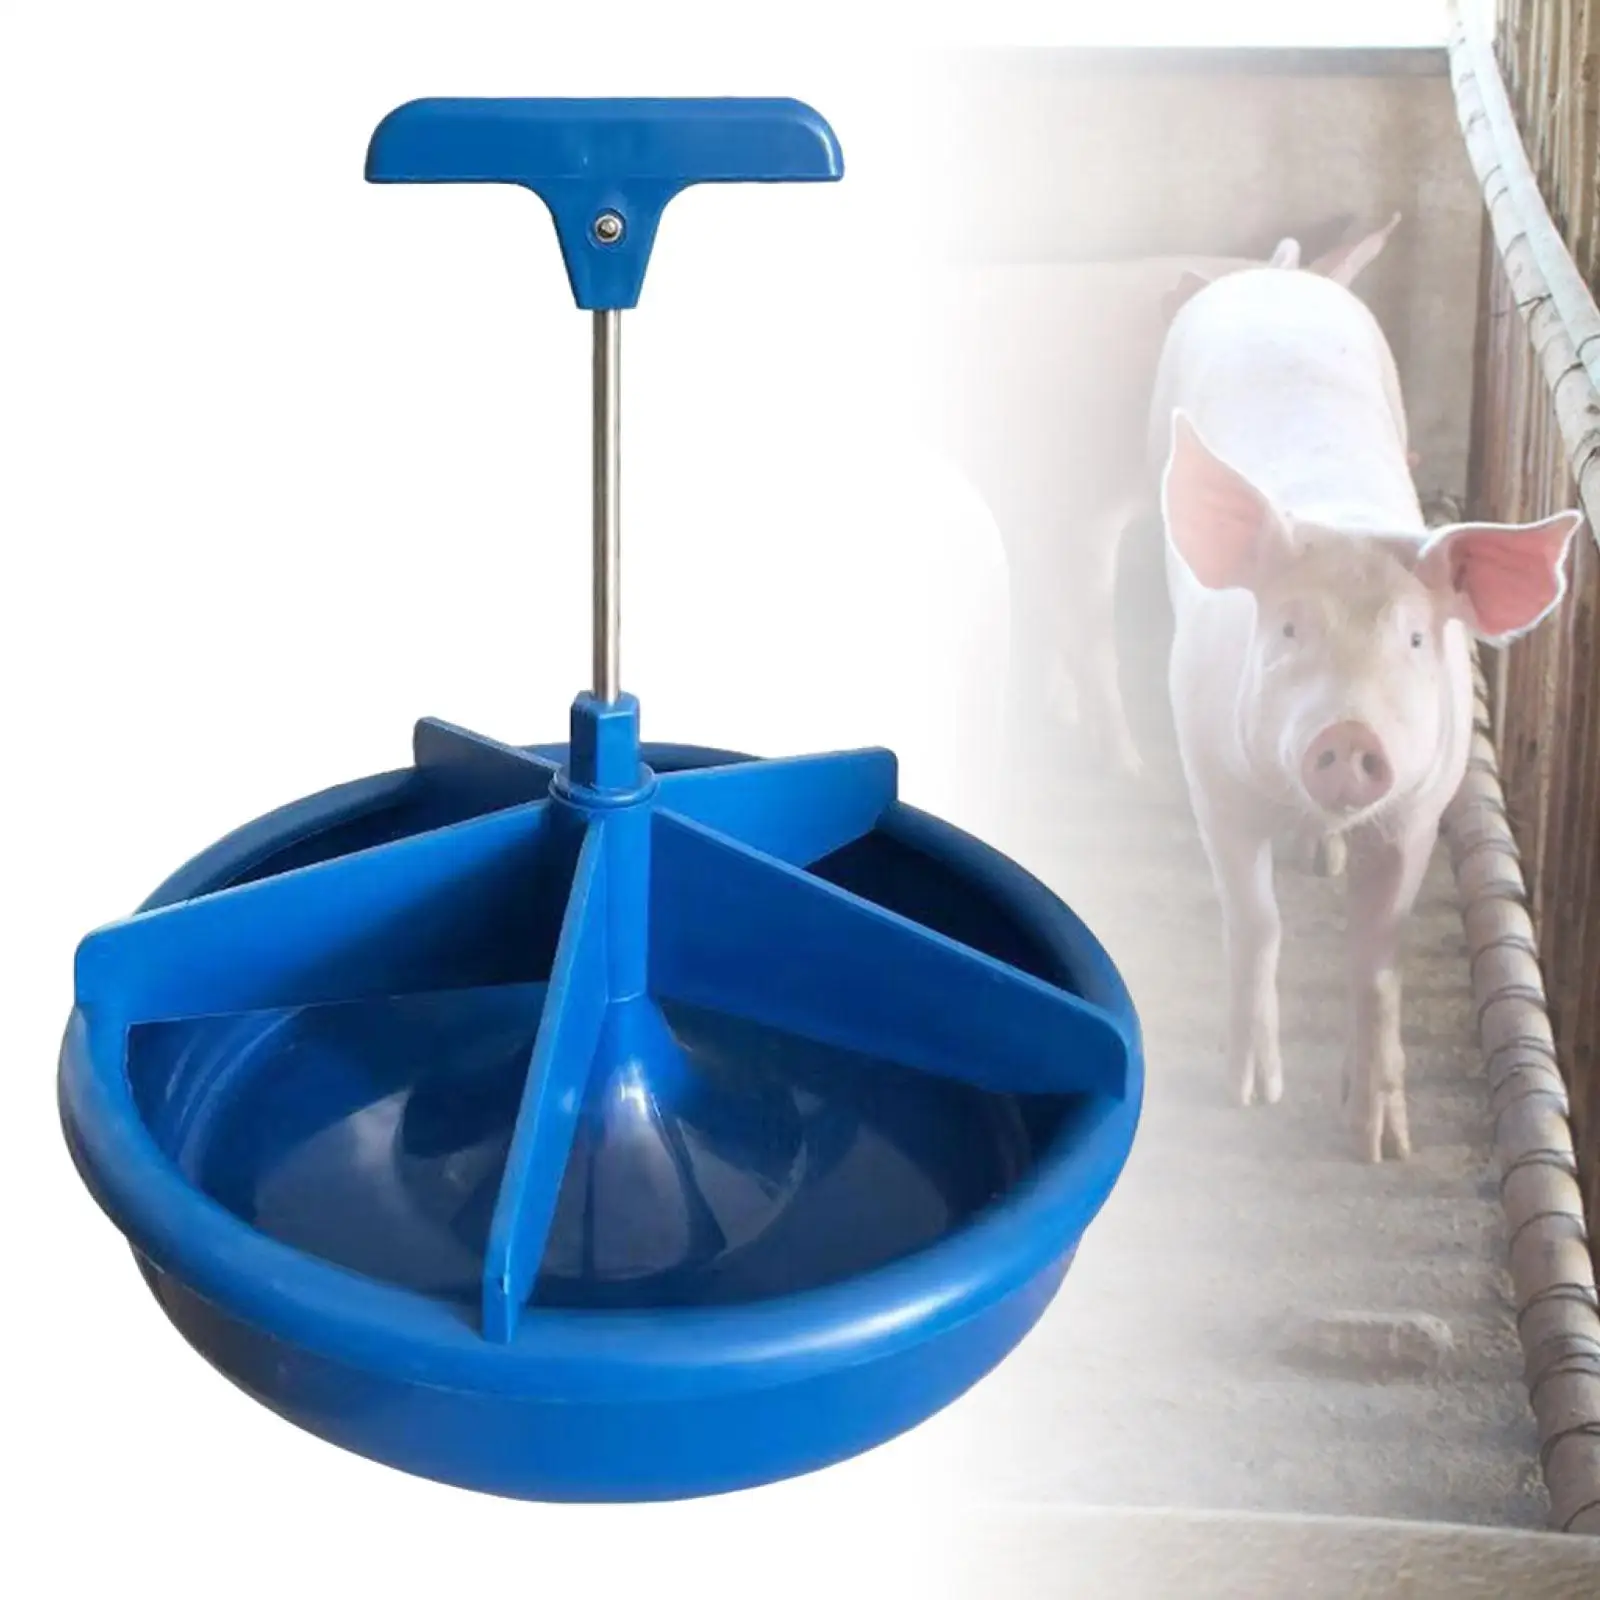 Pig feed Trough Bucket 5 Slot Livestock feed Bowl Piglet Feeder Pig Feeder Bowl for Poultry Pet Dog Animal Husbandry Accessories